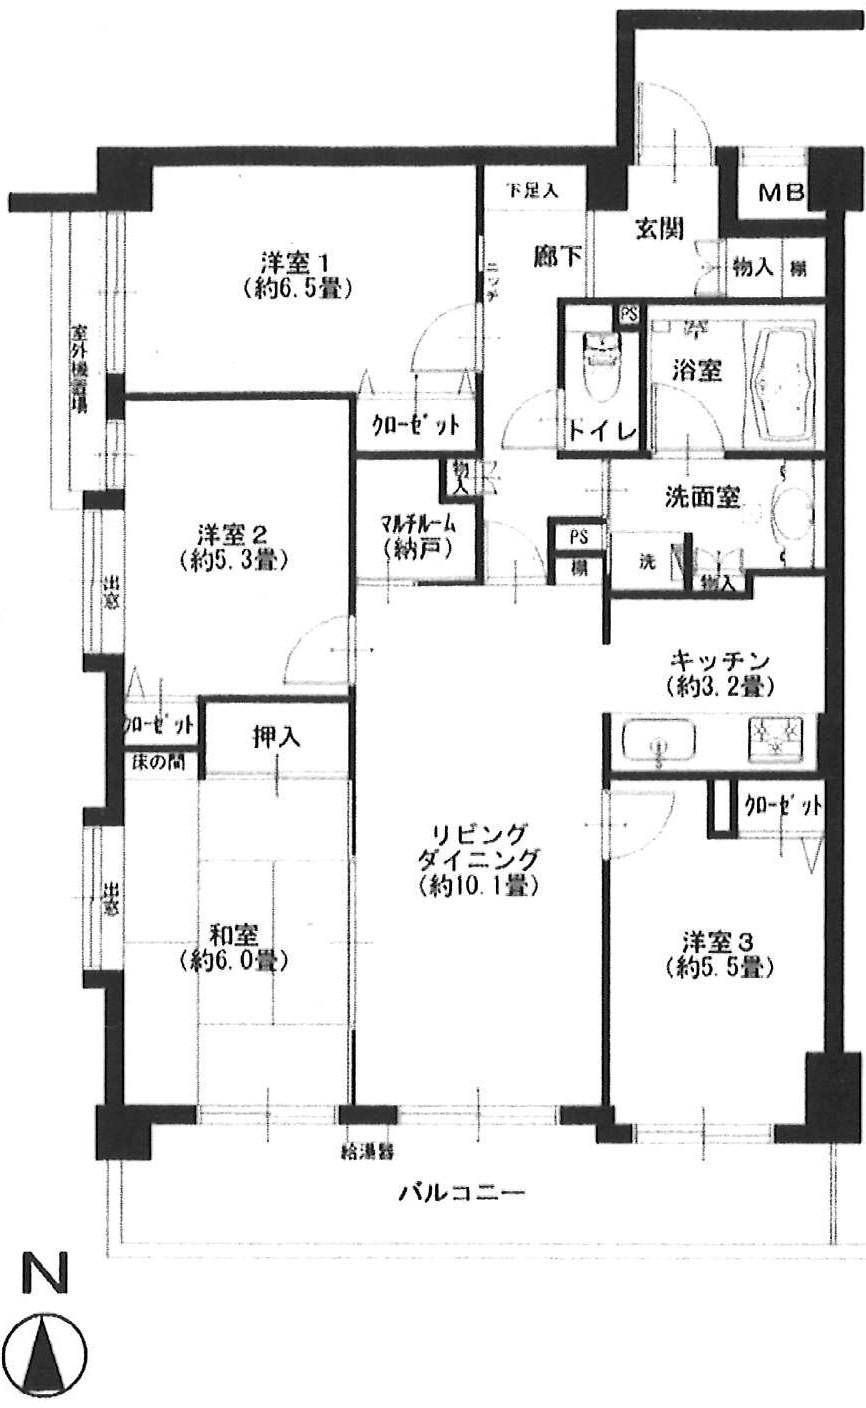 Floor plan. 4LDK, Price 39,900,000 yen, Footprint 83.3 sq m , You can preview at any time because of the balcony area 11.03 sq m 4LDK vacancy